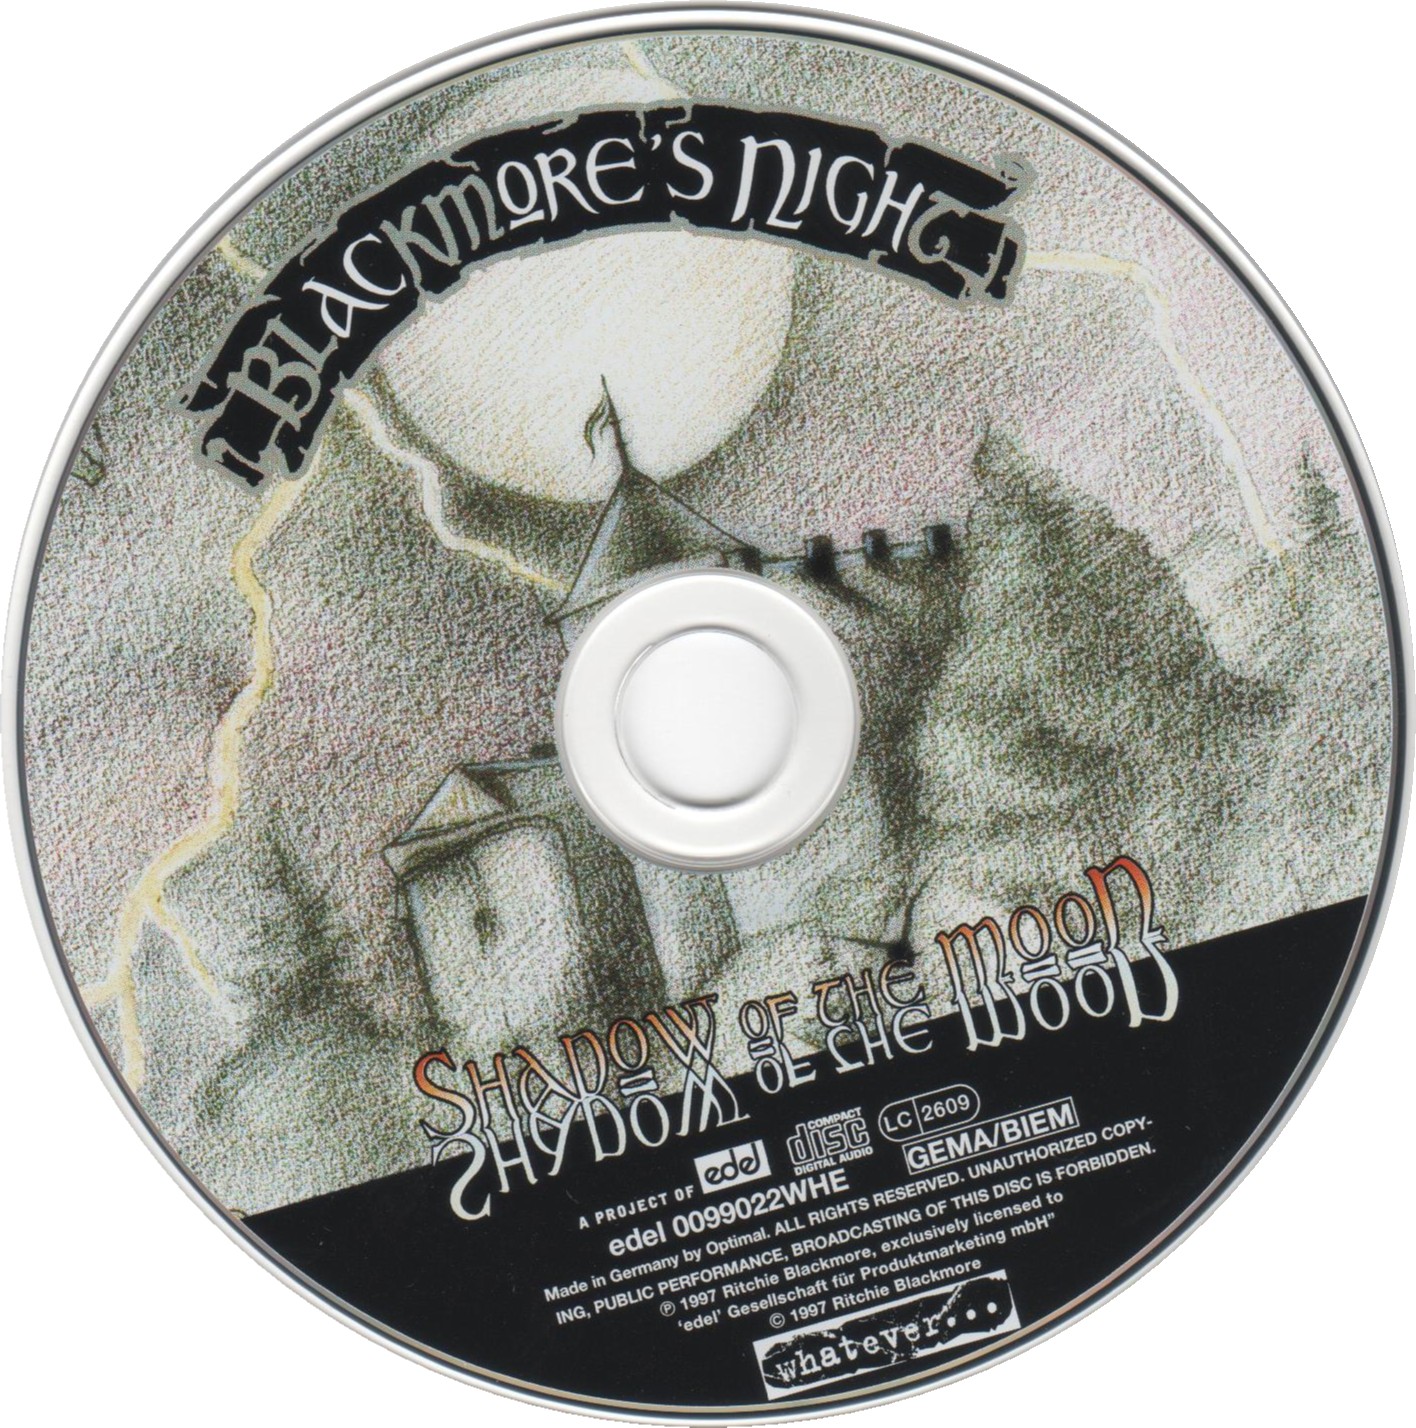 Blackmores night shadow of the moon. Blackmore's Night Shadow of the Moon. Blackmore's Night 1997. Blackmore's Night Shadows of the Moon переиздание 2023. 1997 Shadow of the Moon.